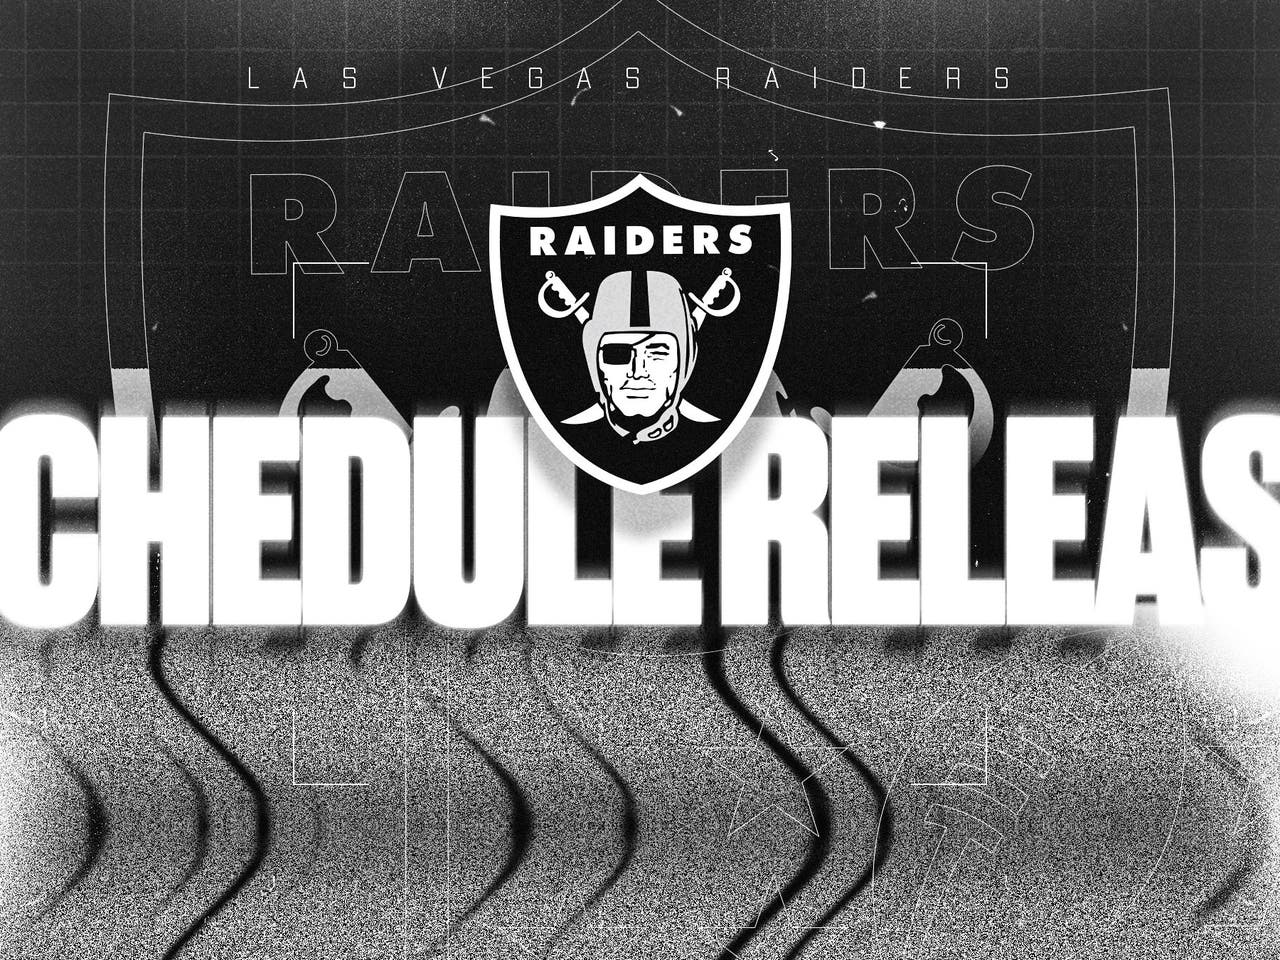 2023 Las Vegas Raiders Predictions: Game and win/loss record projections